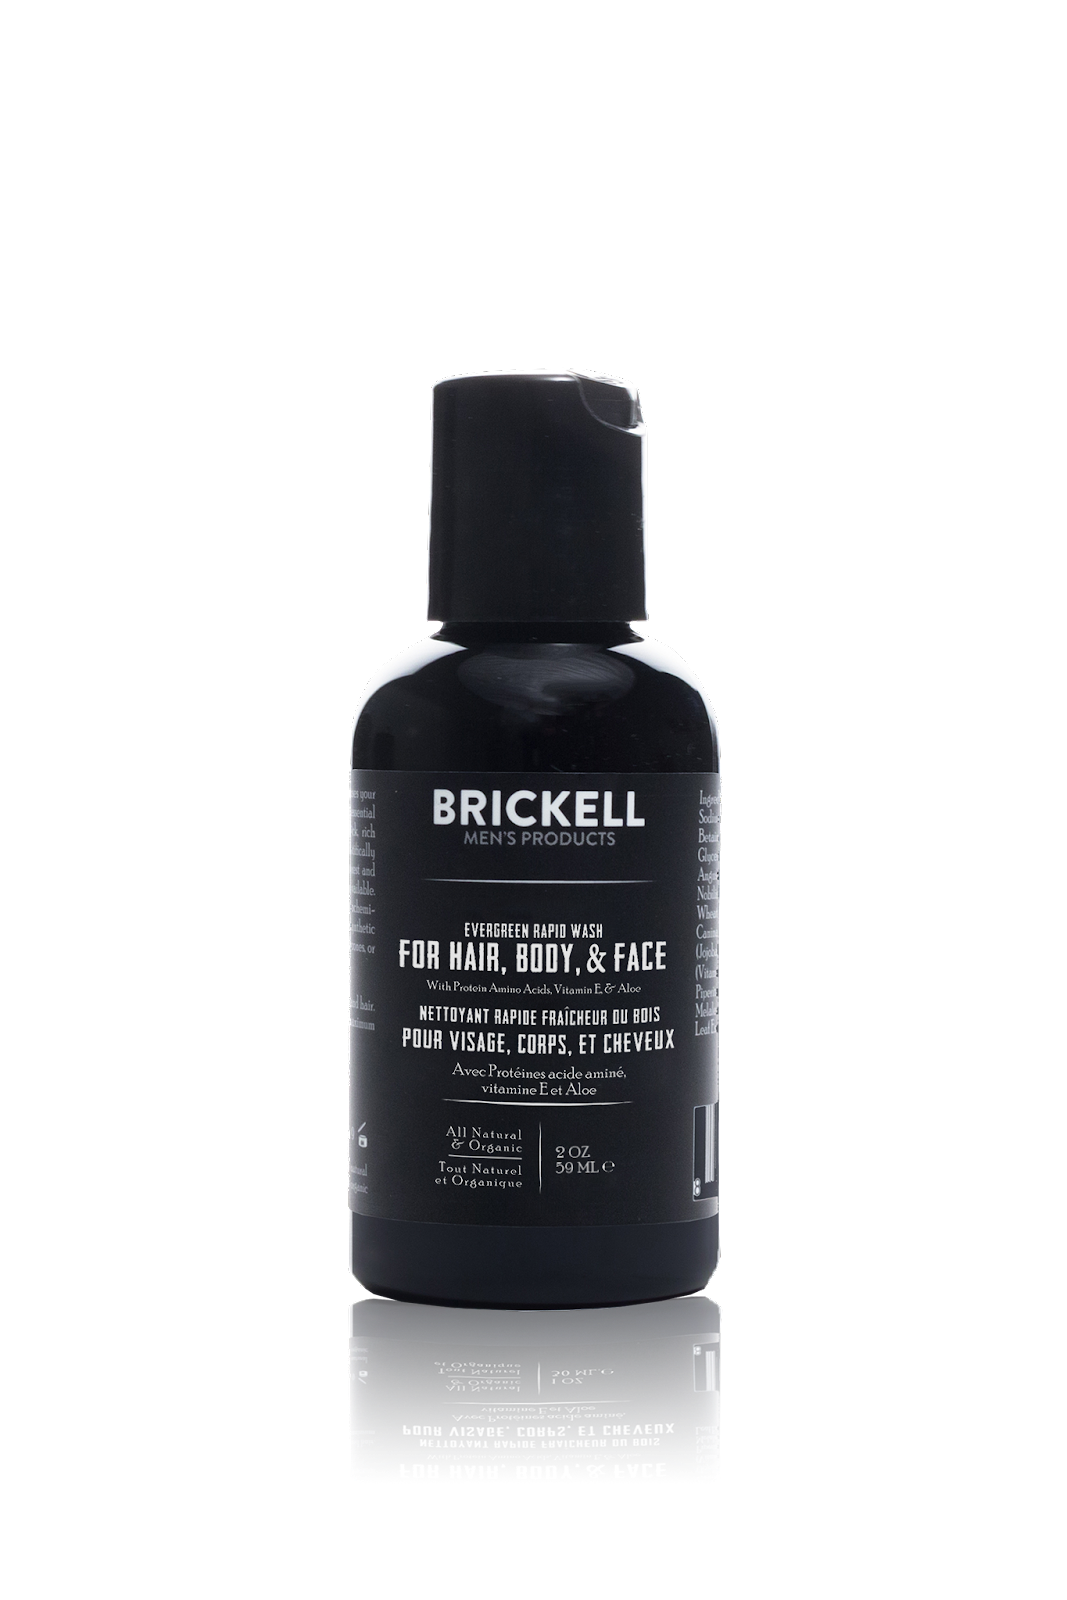 The Best Men's 3 in 1 Body Wash - All in One | Brickell Men's Products ...